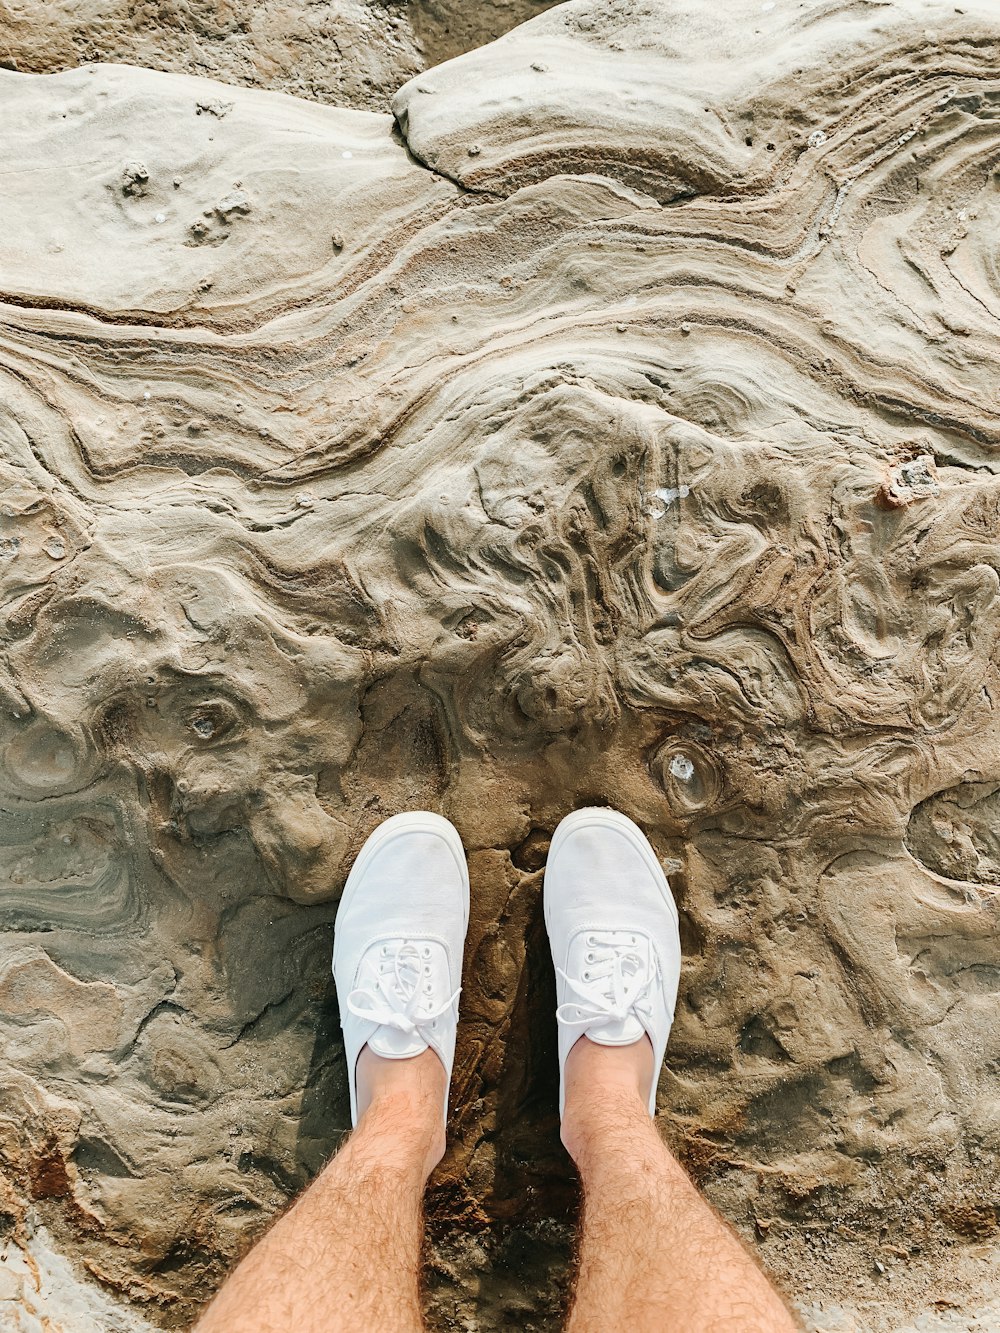 person in white shoes standing on gray rock